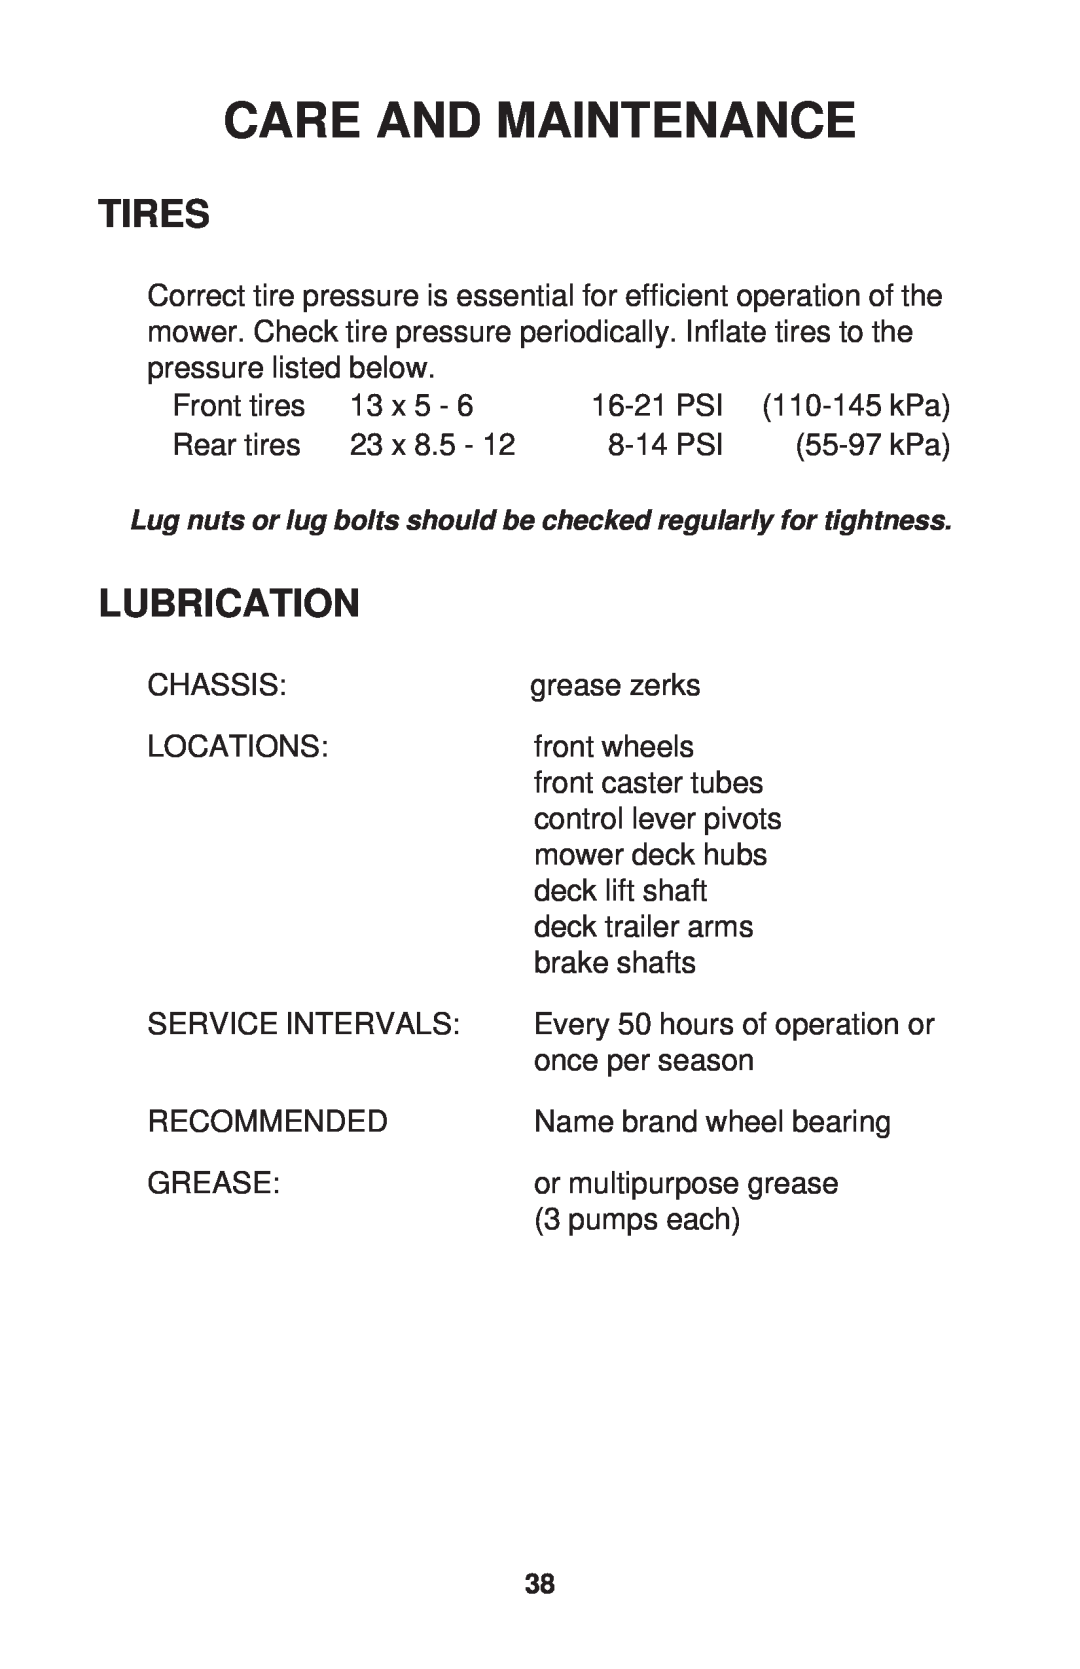 Dixon ZTR 34, ZTR 44, ZTR 34 manual Tires, Lubrication, Care And Maintenance 